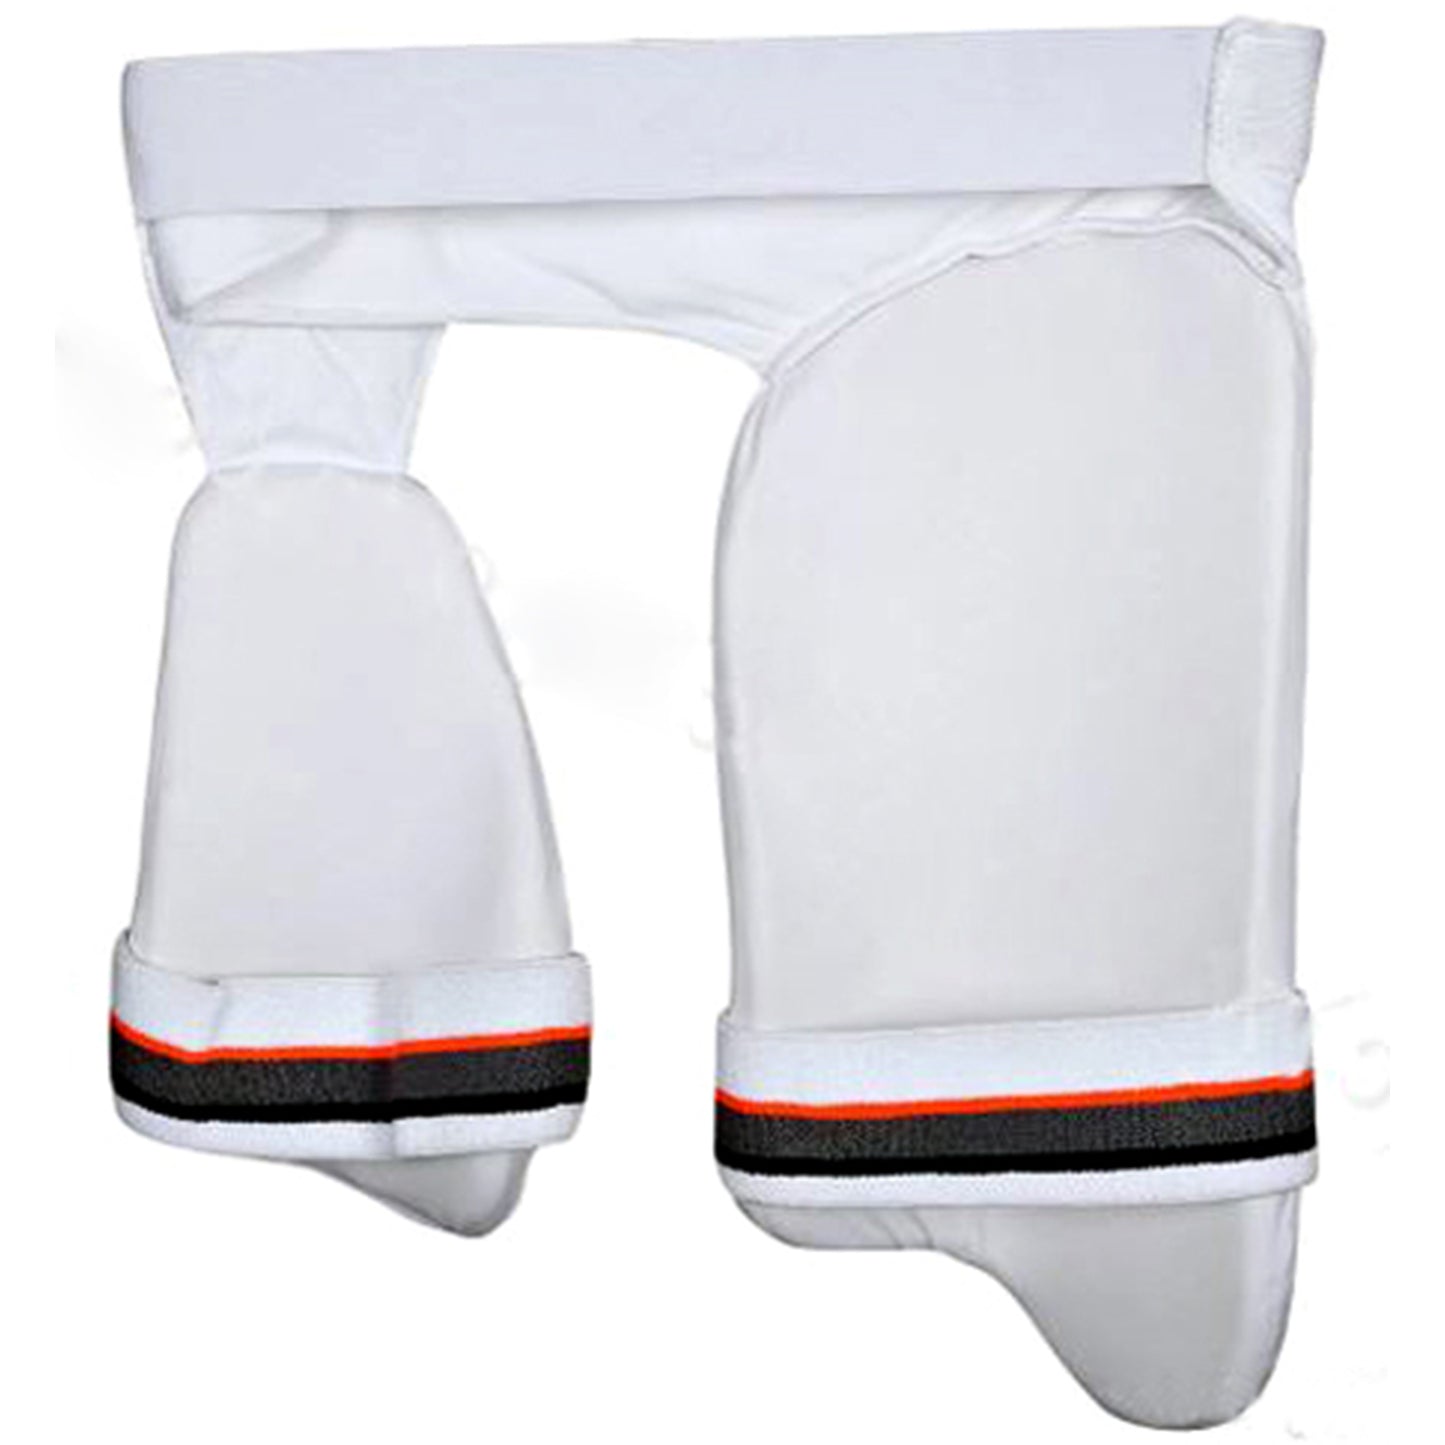 SG Ultimate (Combo) Left Hand Thigh Pads, - Best Price online Prokicksports.com